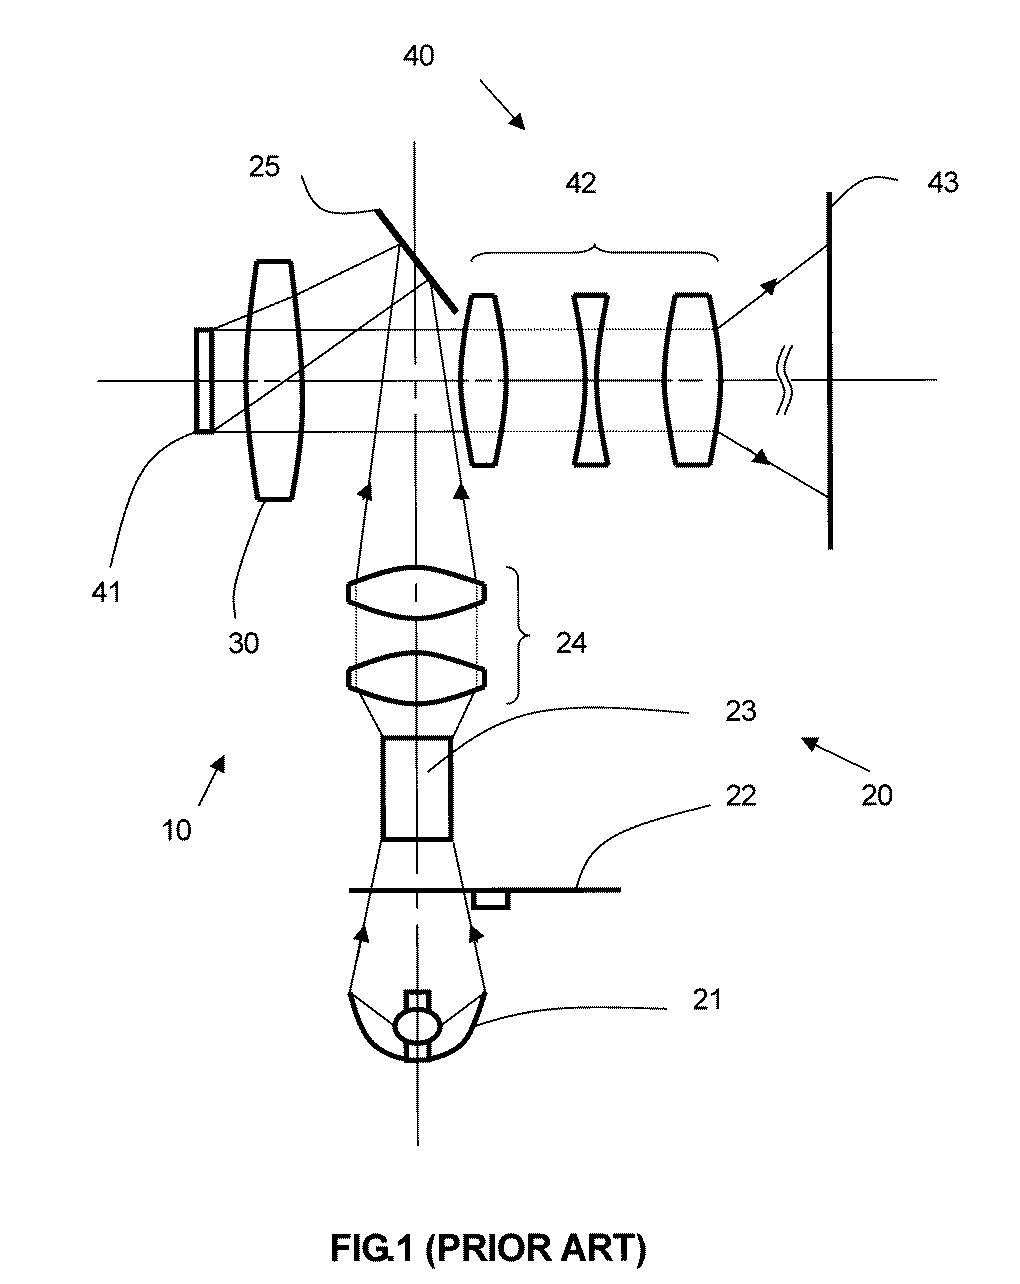 An illumination method and apparatus for projection system